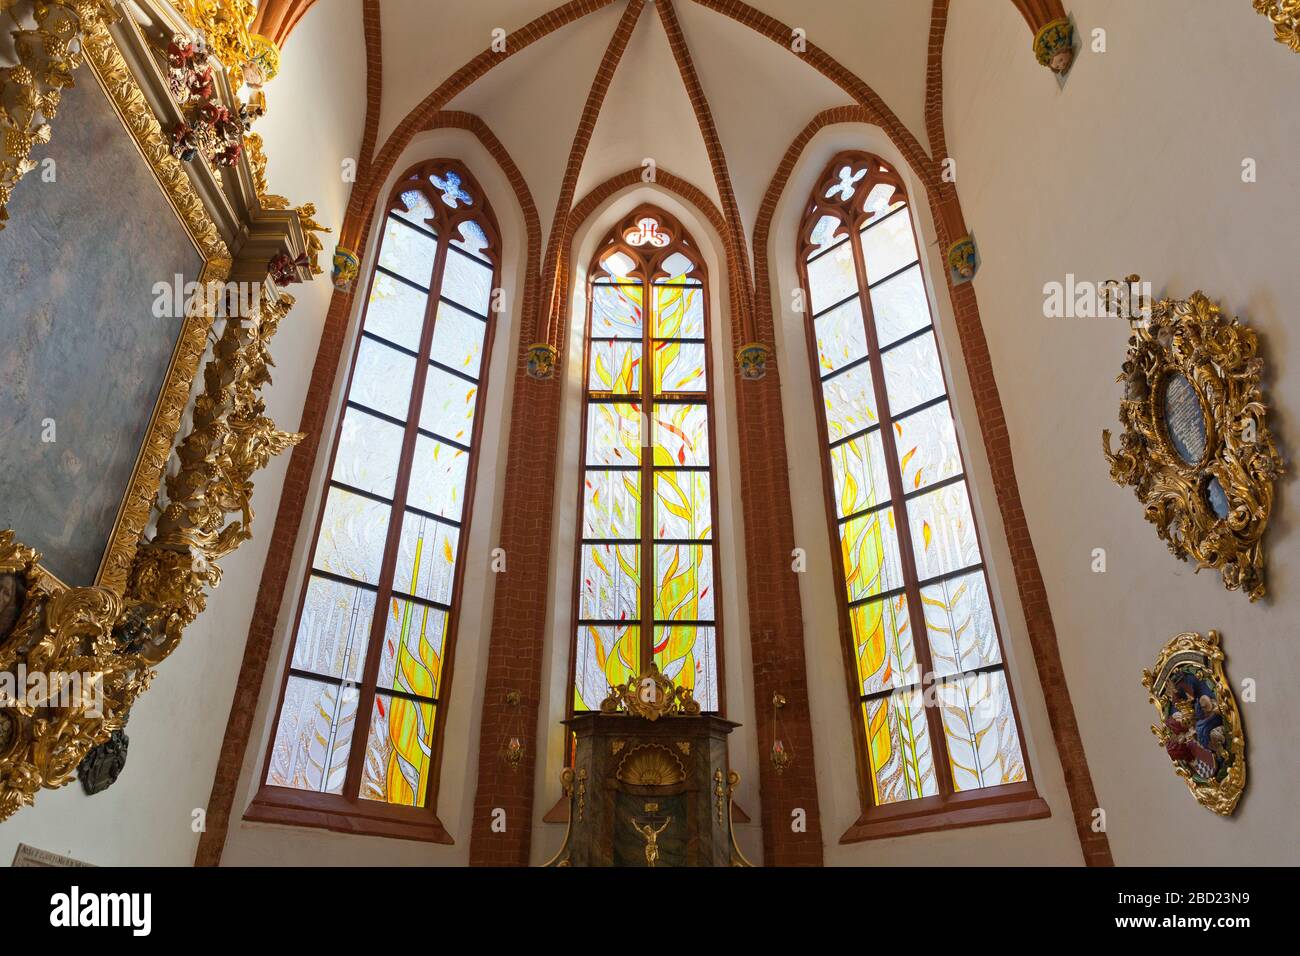 Stained glass windows in Church of St. Elizabeth, Wroclaw, Poland Stock Photo